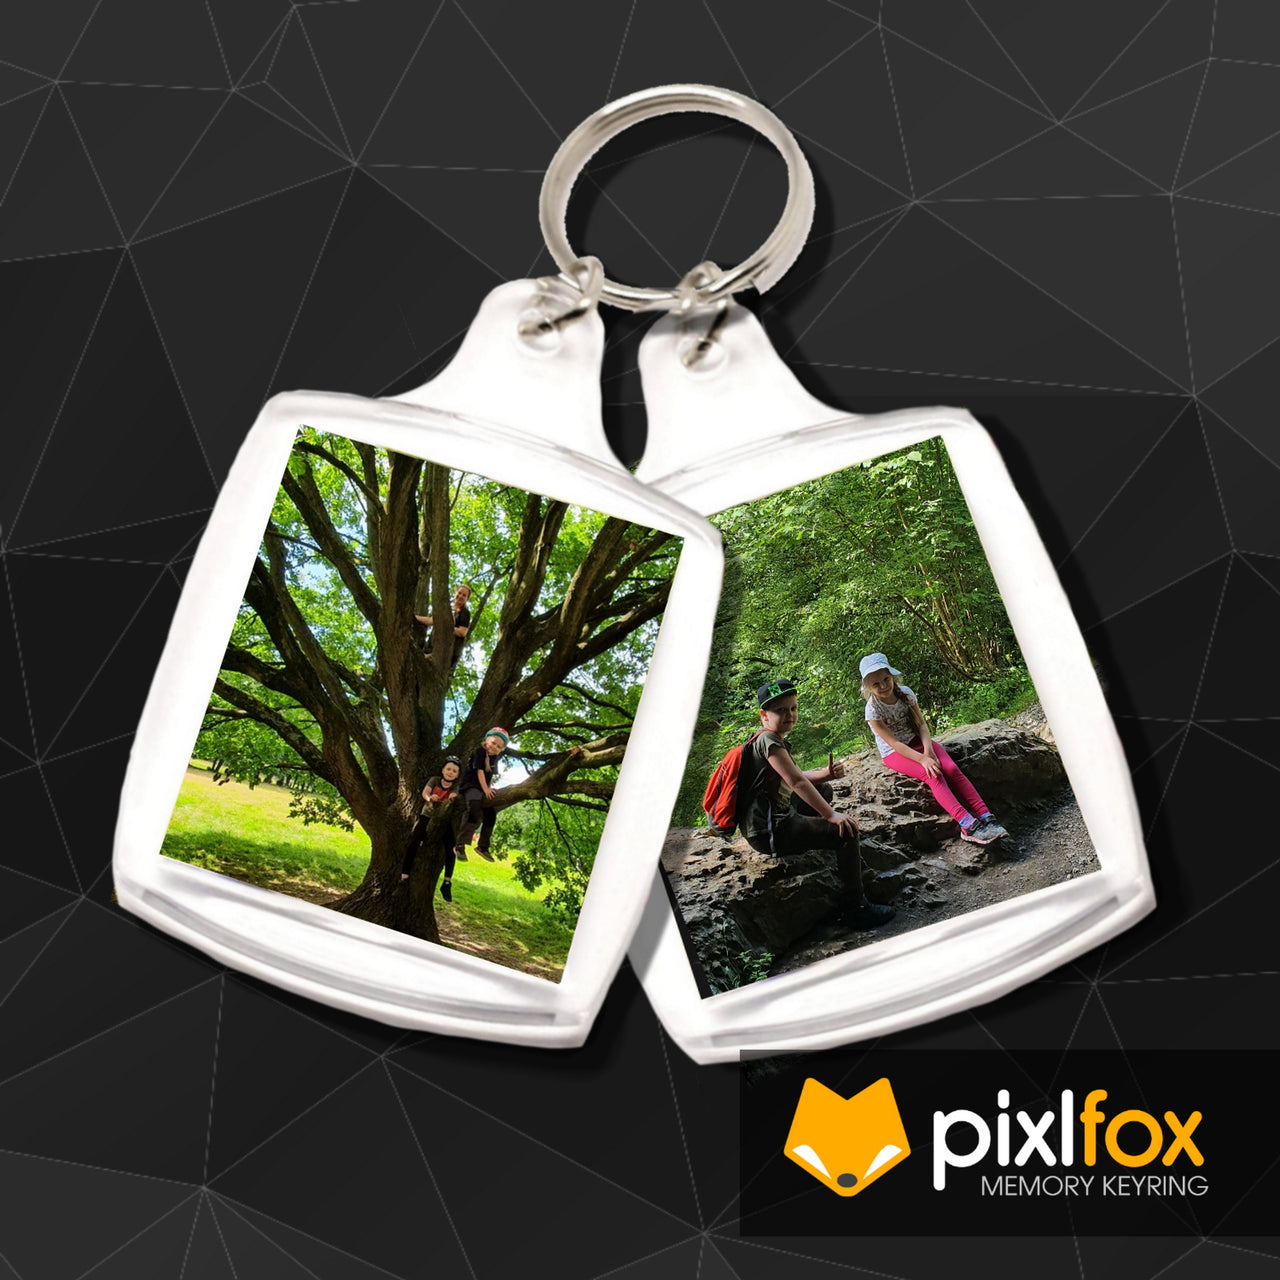 Custom Printed Photo Keyring 45 x 35mm | Buy Additional Keyrings from only 2.50 each!